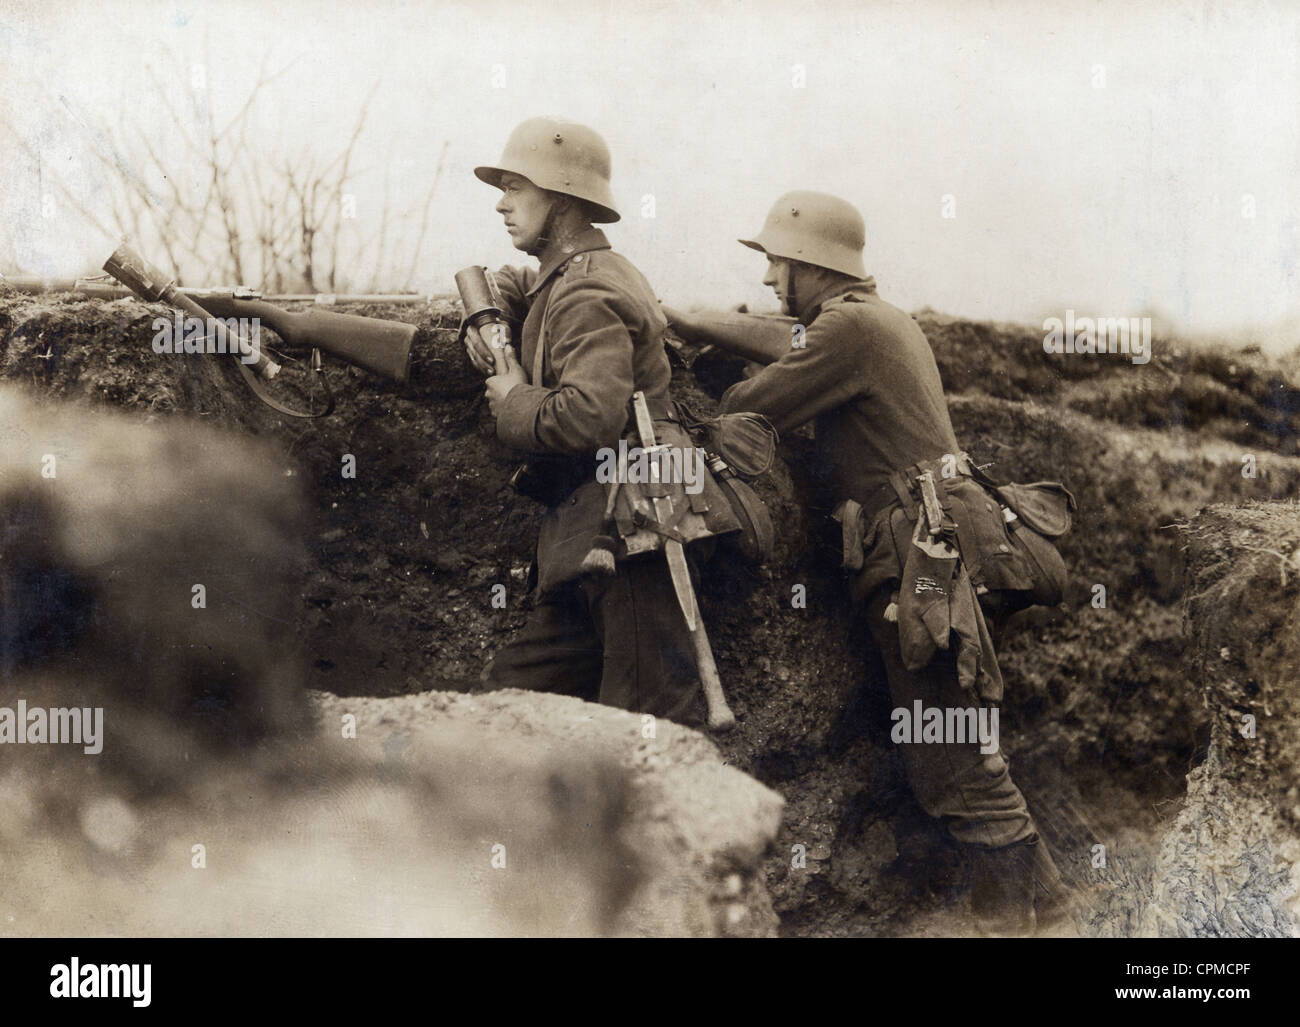 German soldiers in the battlefield of the Battle of the Aisne in France, 1918 Stock Photo